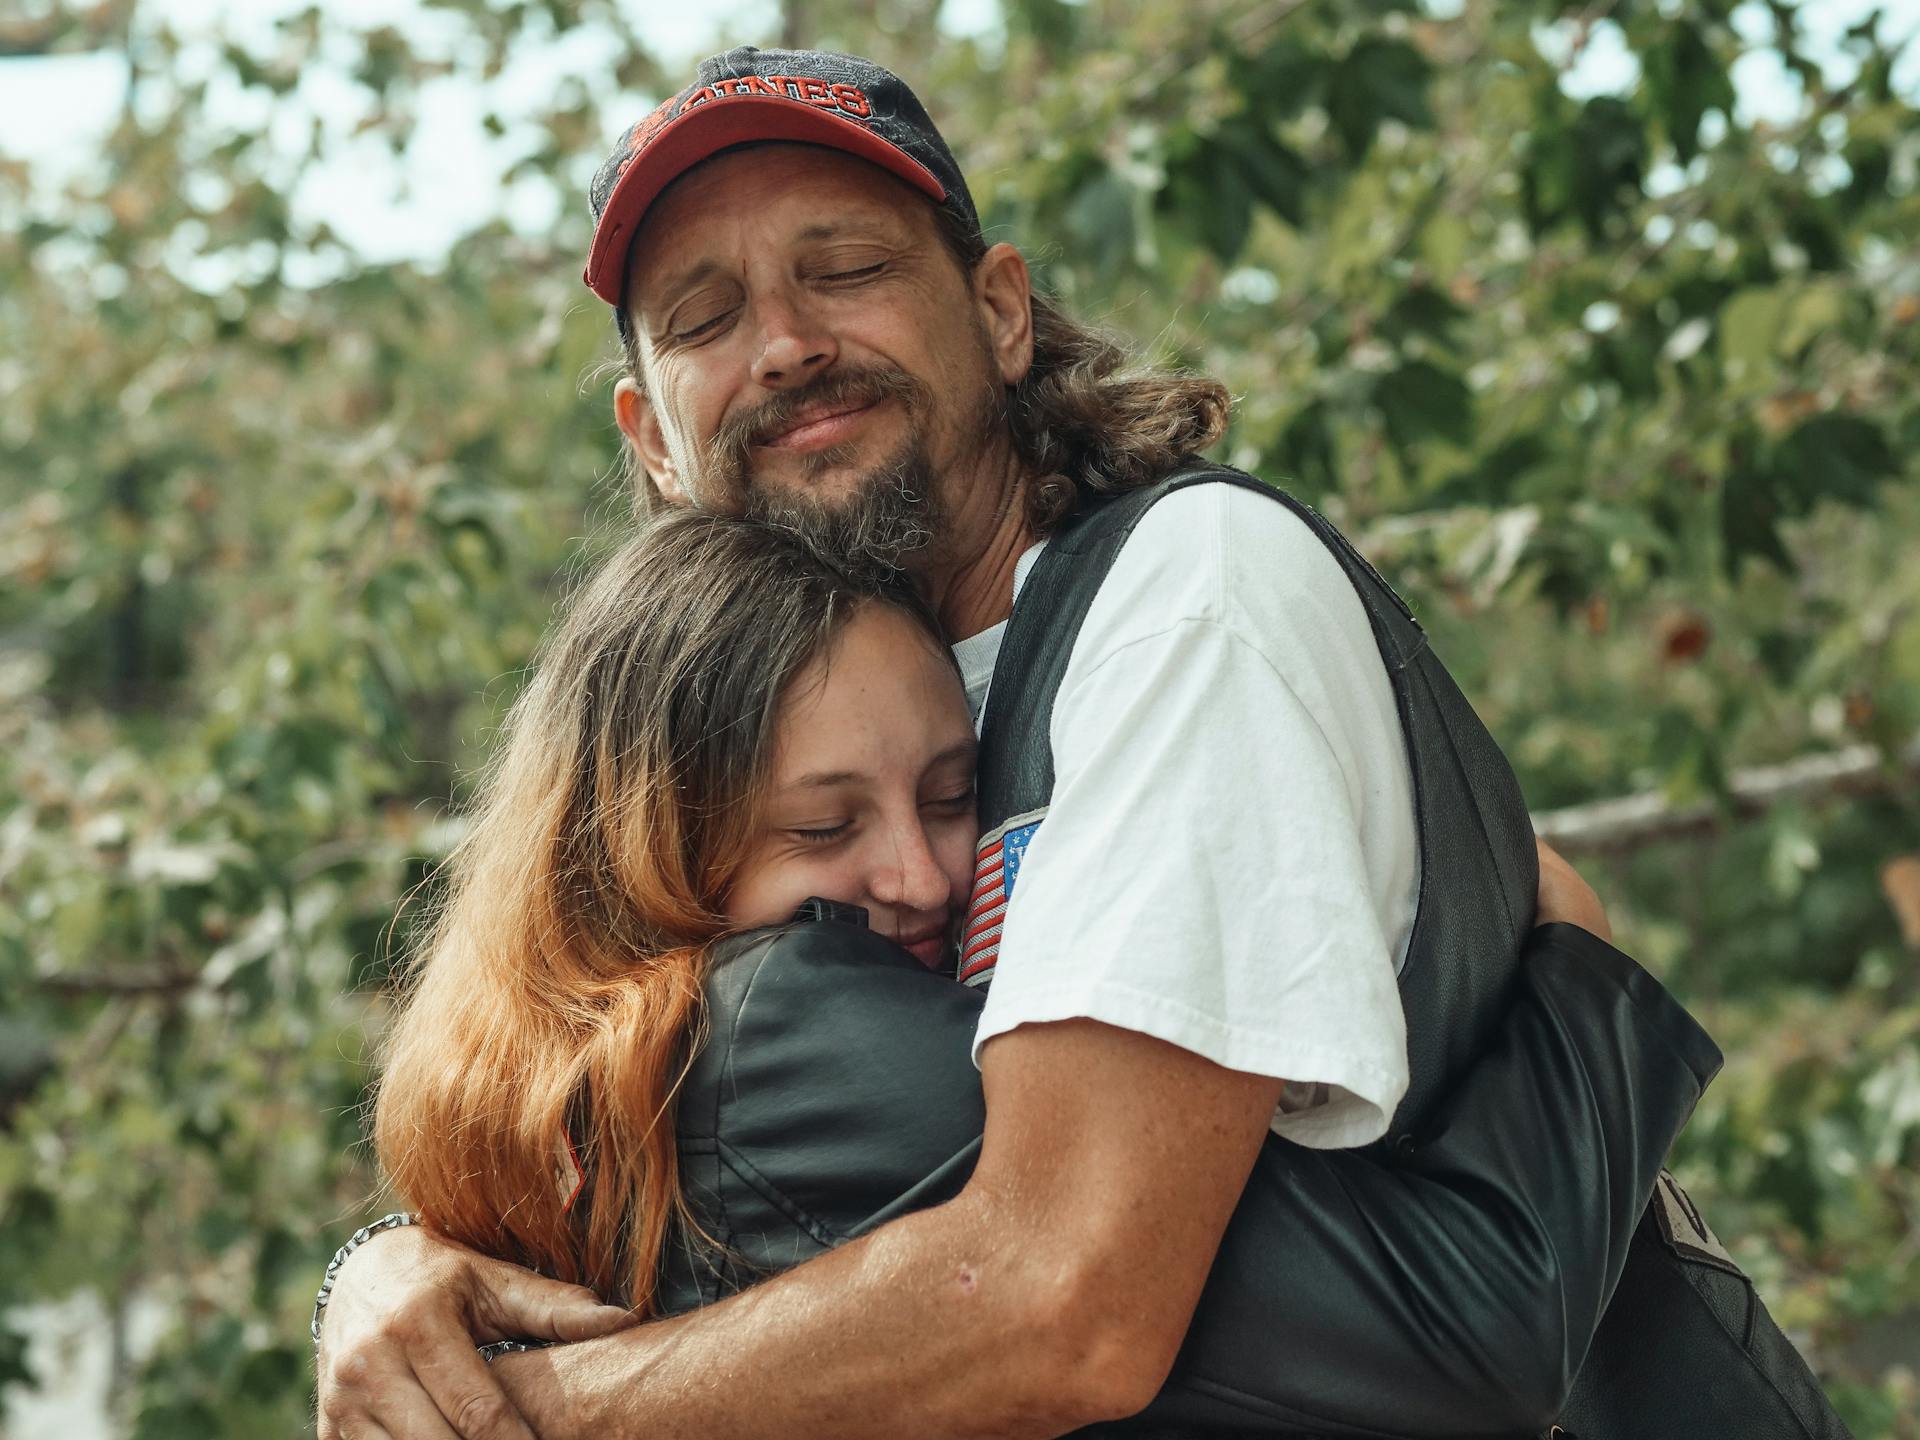 A teenage girl hugging her father | Source: Pexels